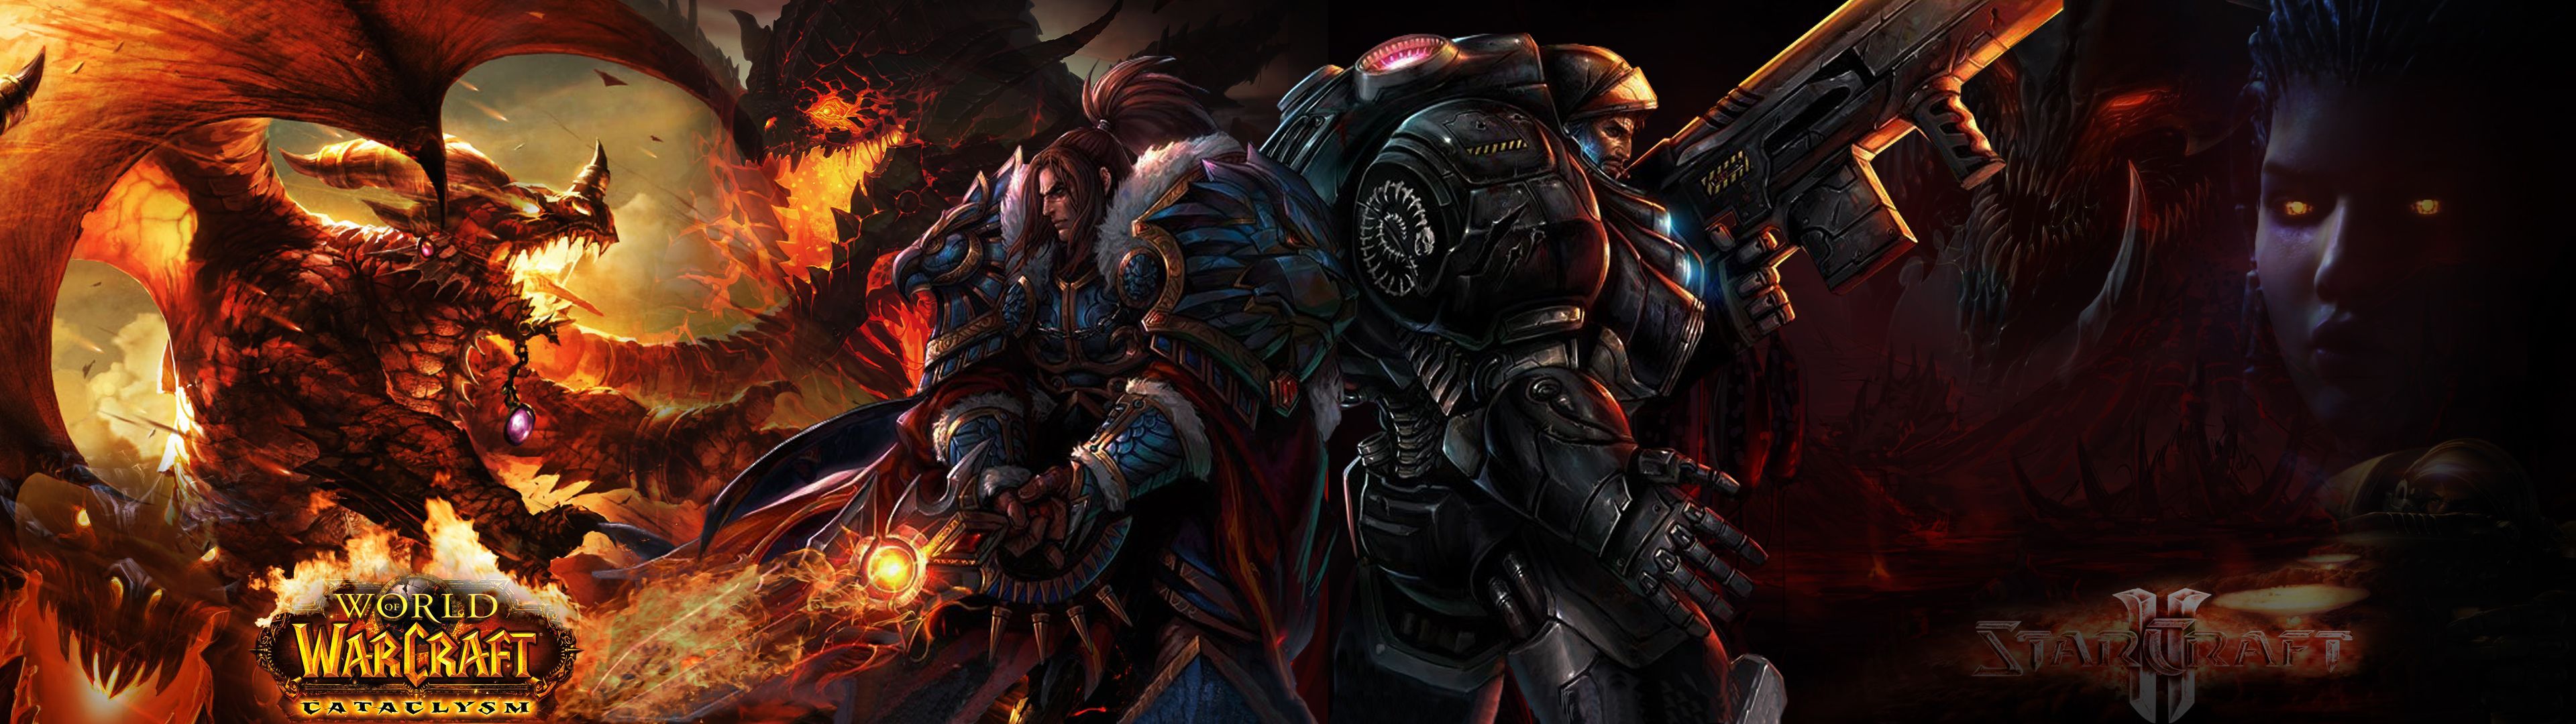 DeviantArt: More Like WoW and SC2 Dual Screen Wallpaper by CHIPINATORs